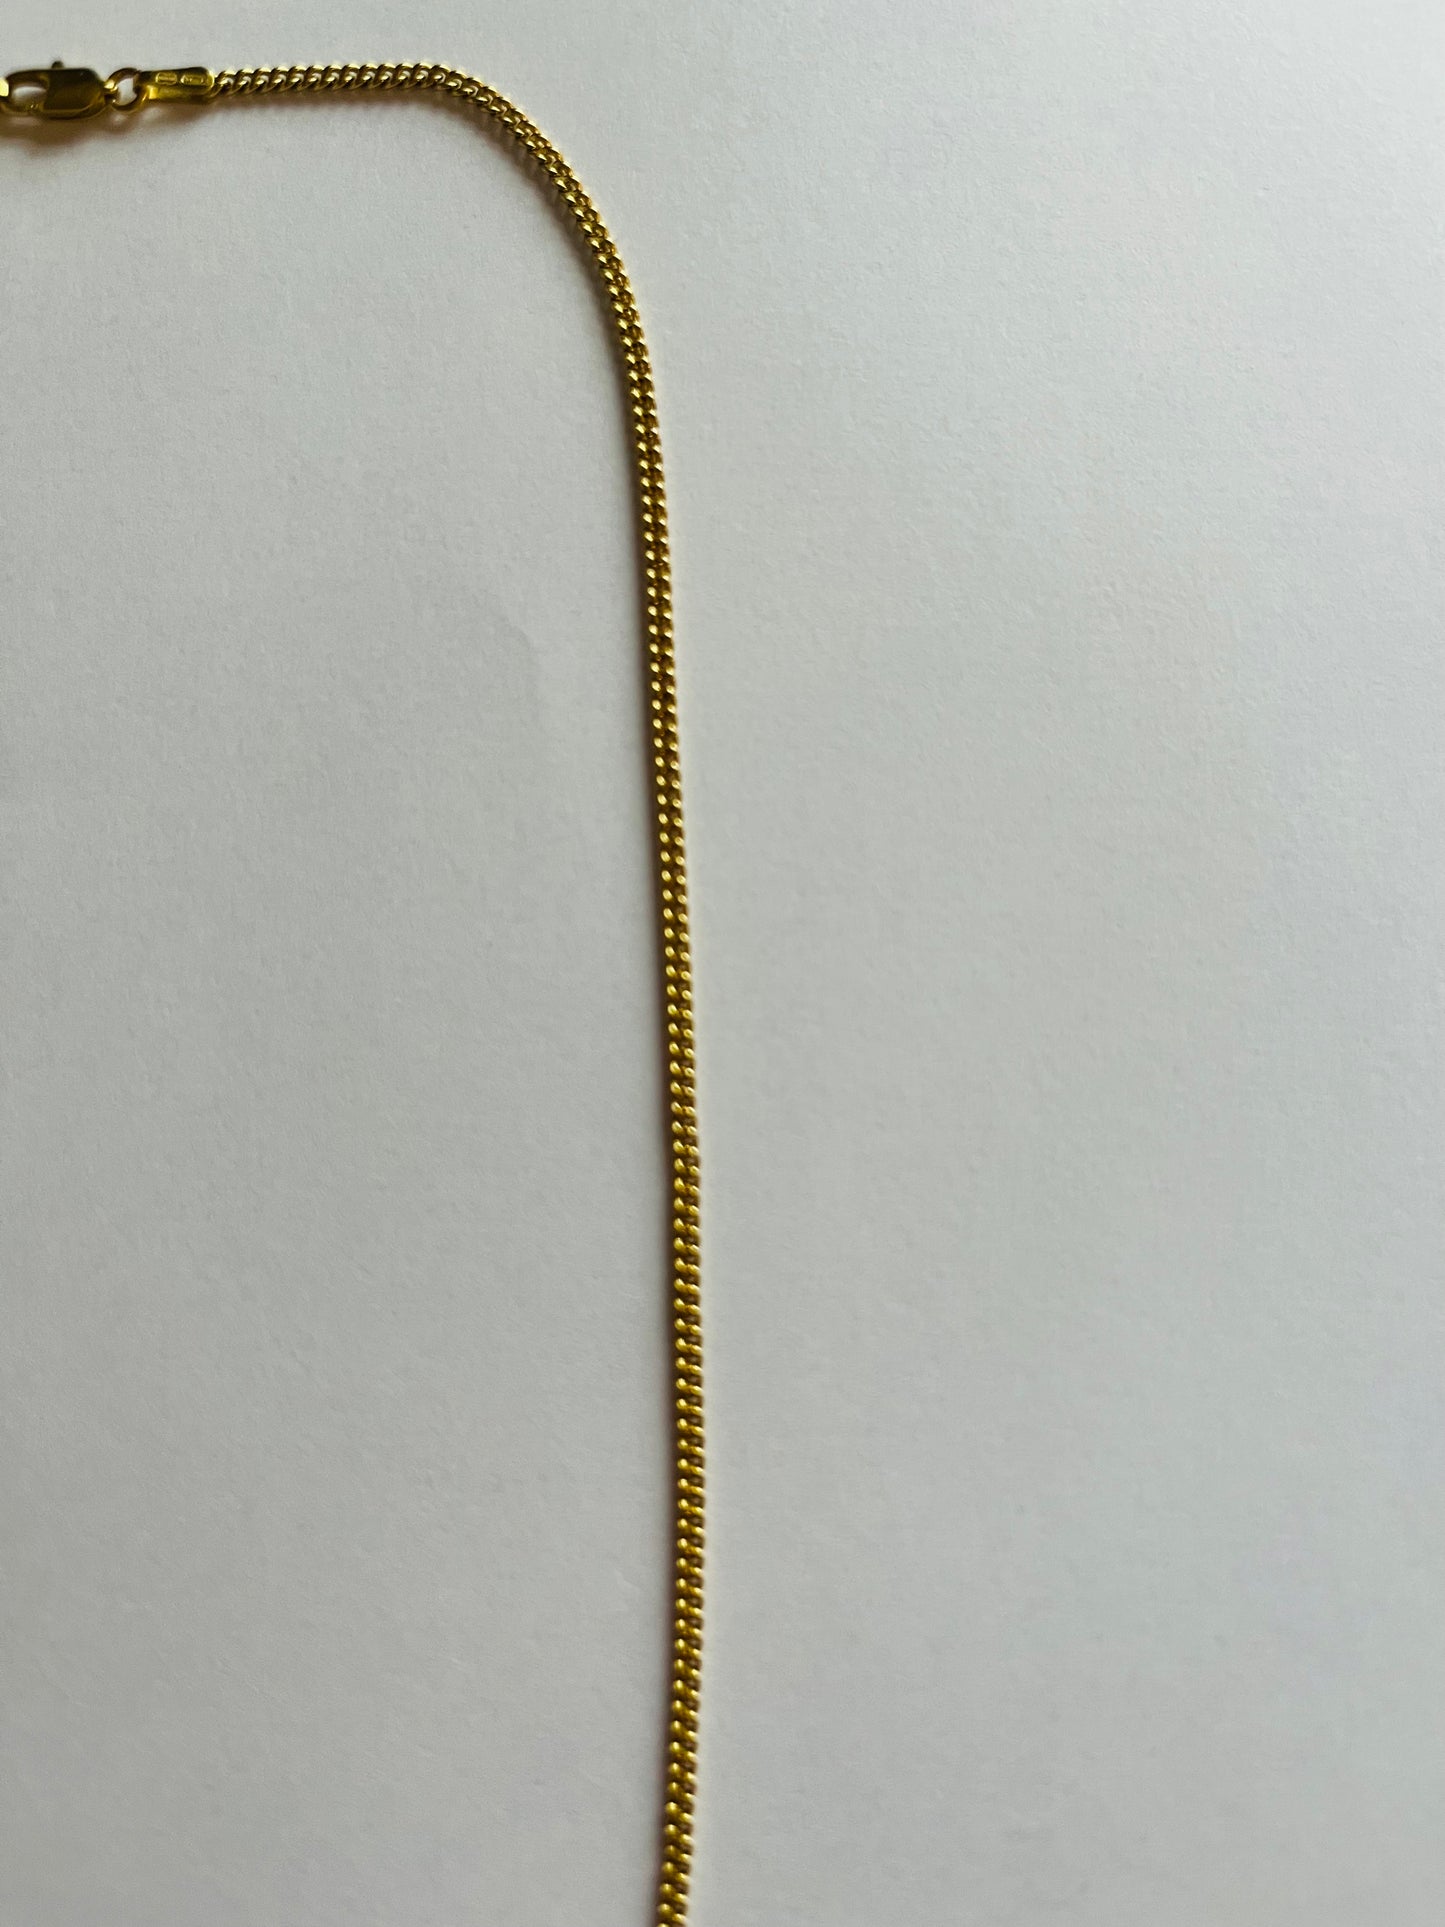 9ct Yellow Gold 18 Inch Necklace Chain Vintage Italian